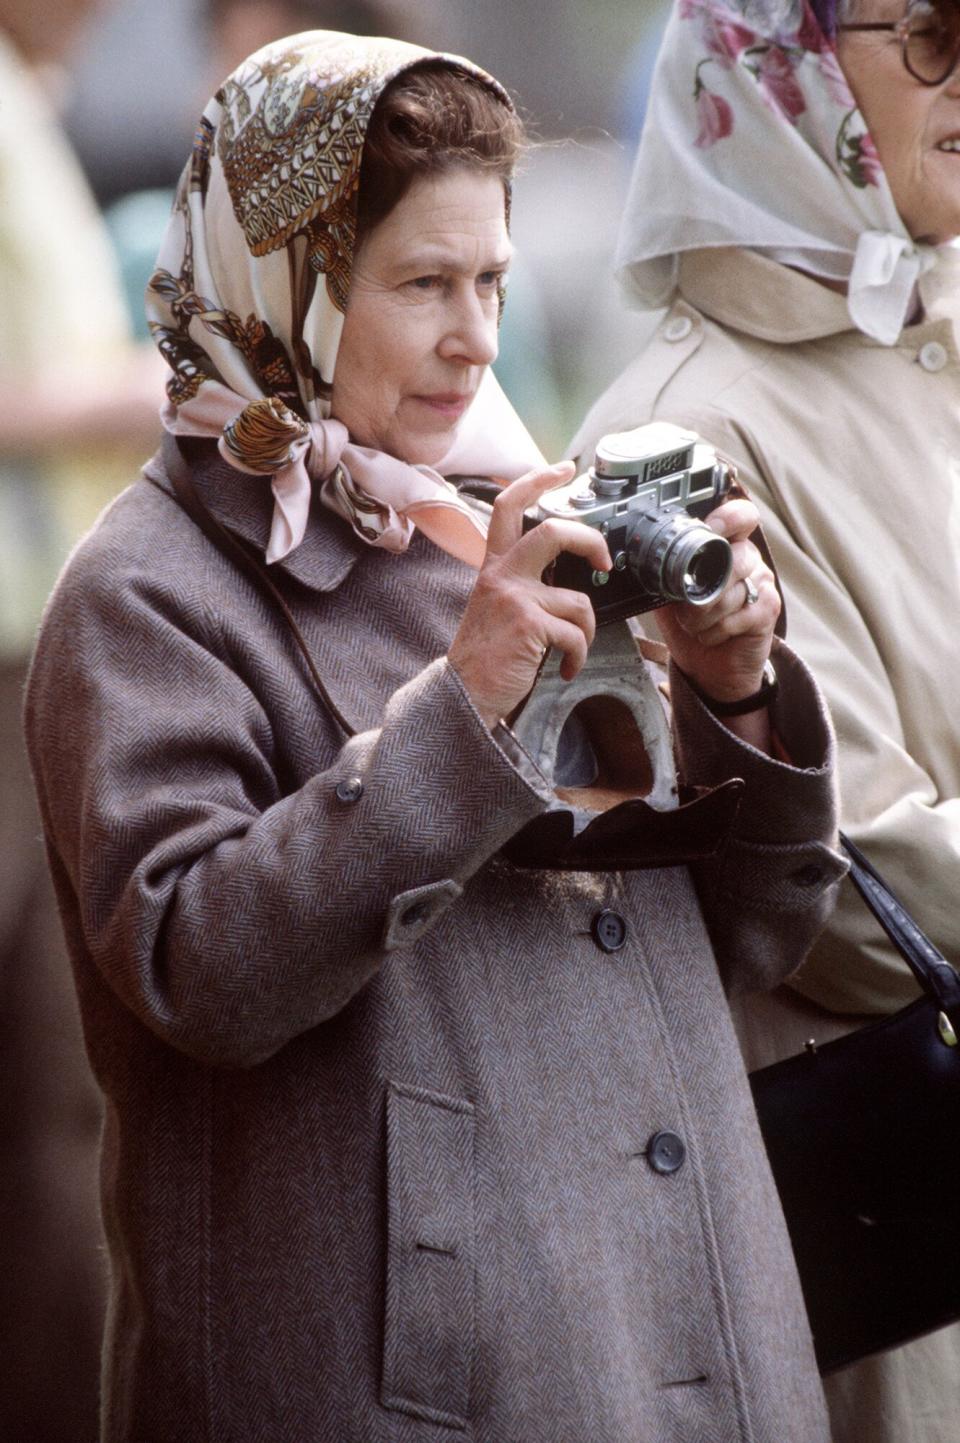 Queen At The Windsor Horse Show Taking Photographs With Her Camera